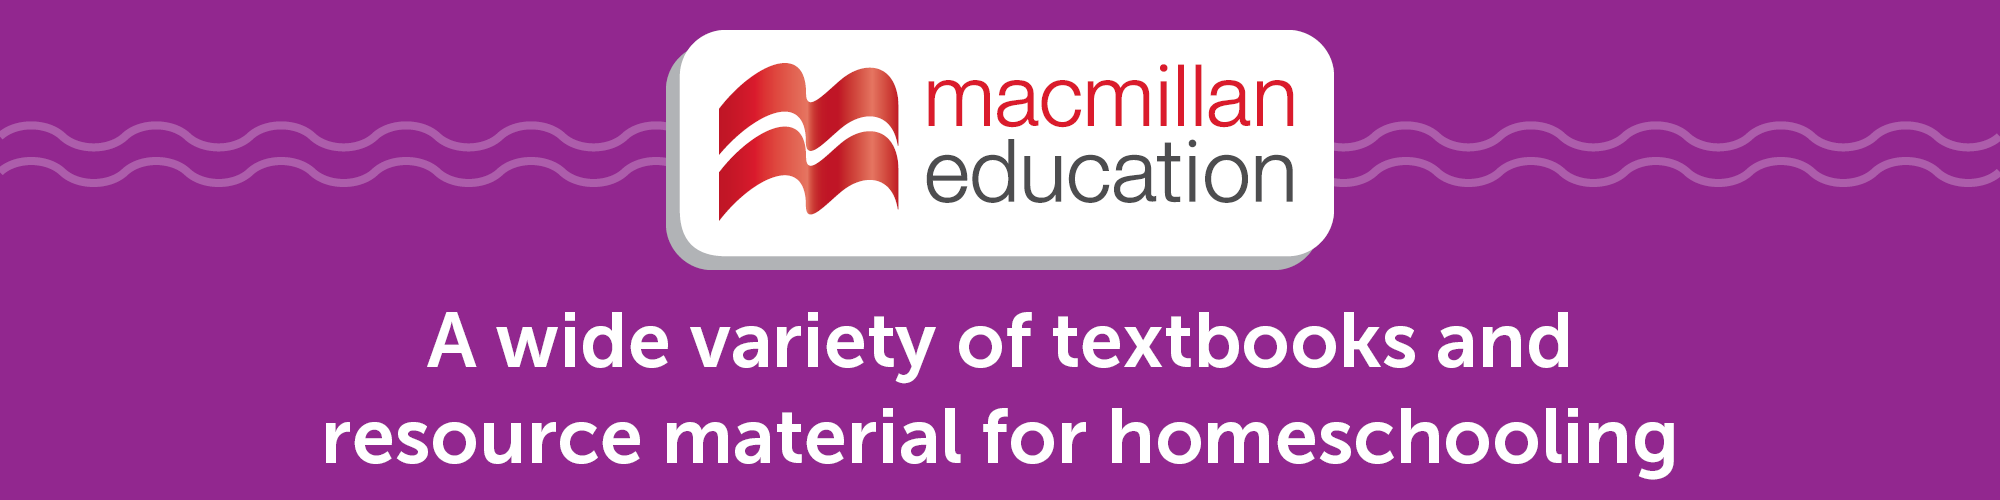 Banner for Marshall Cavendish Cambridge Primary Maths & Science homeschool curriculum provider.